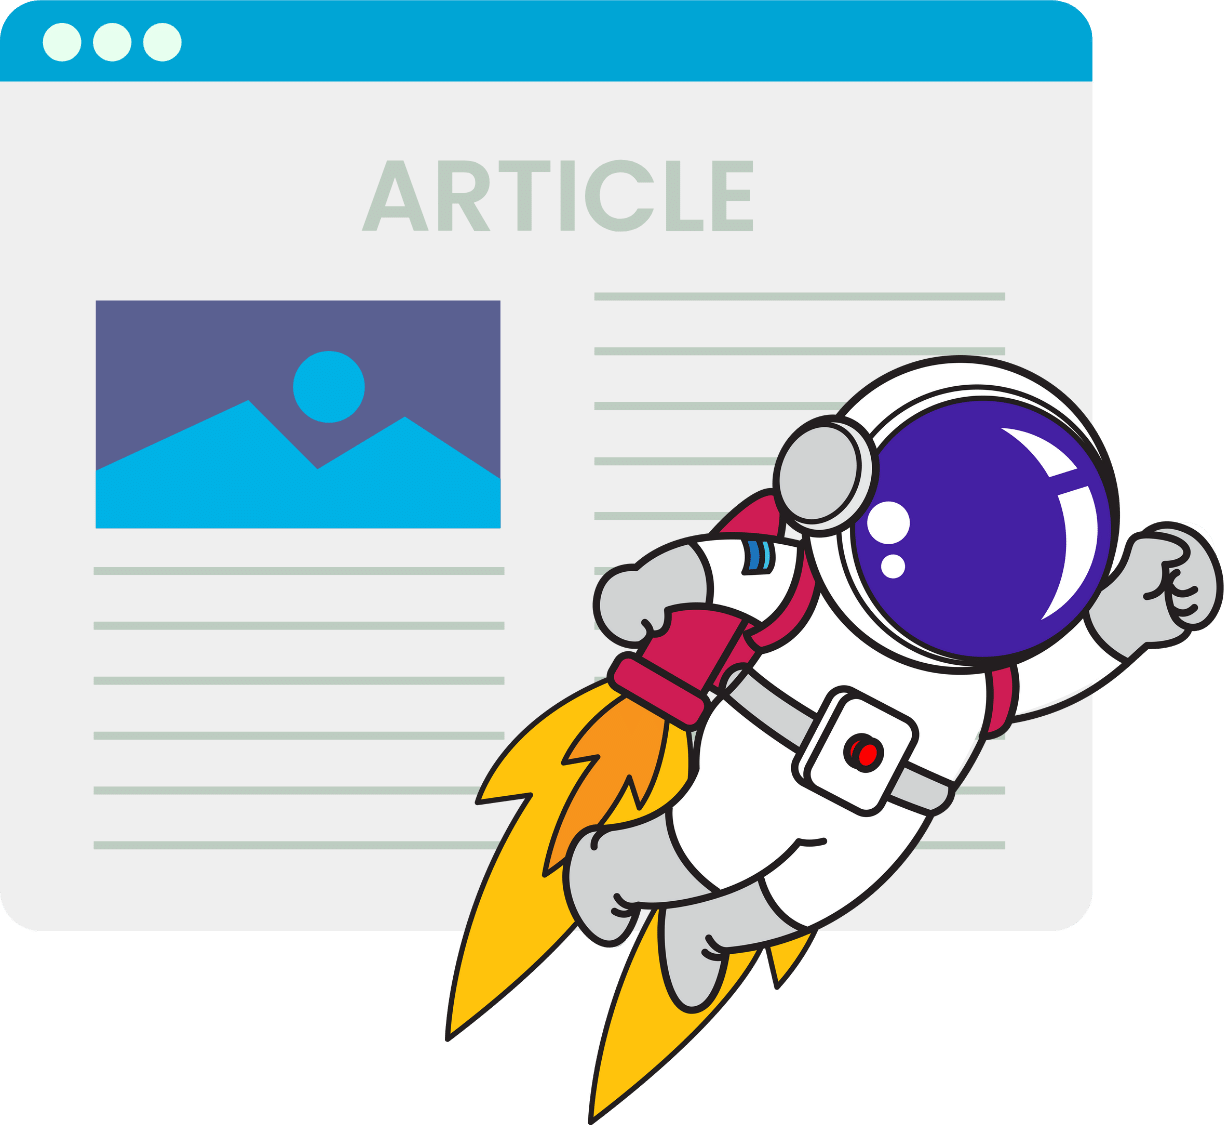 A picture of an article and an astronaut on top